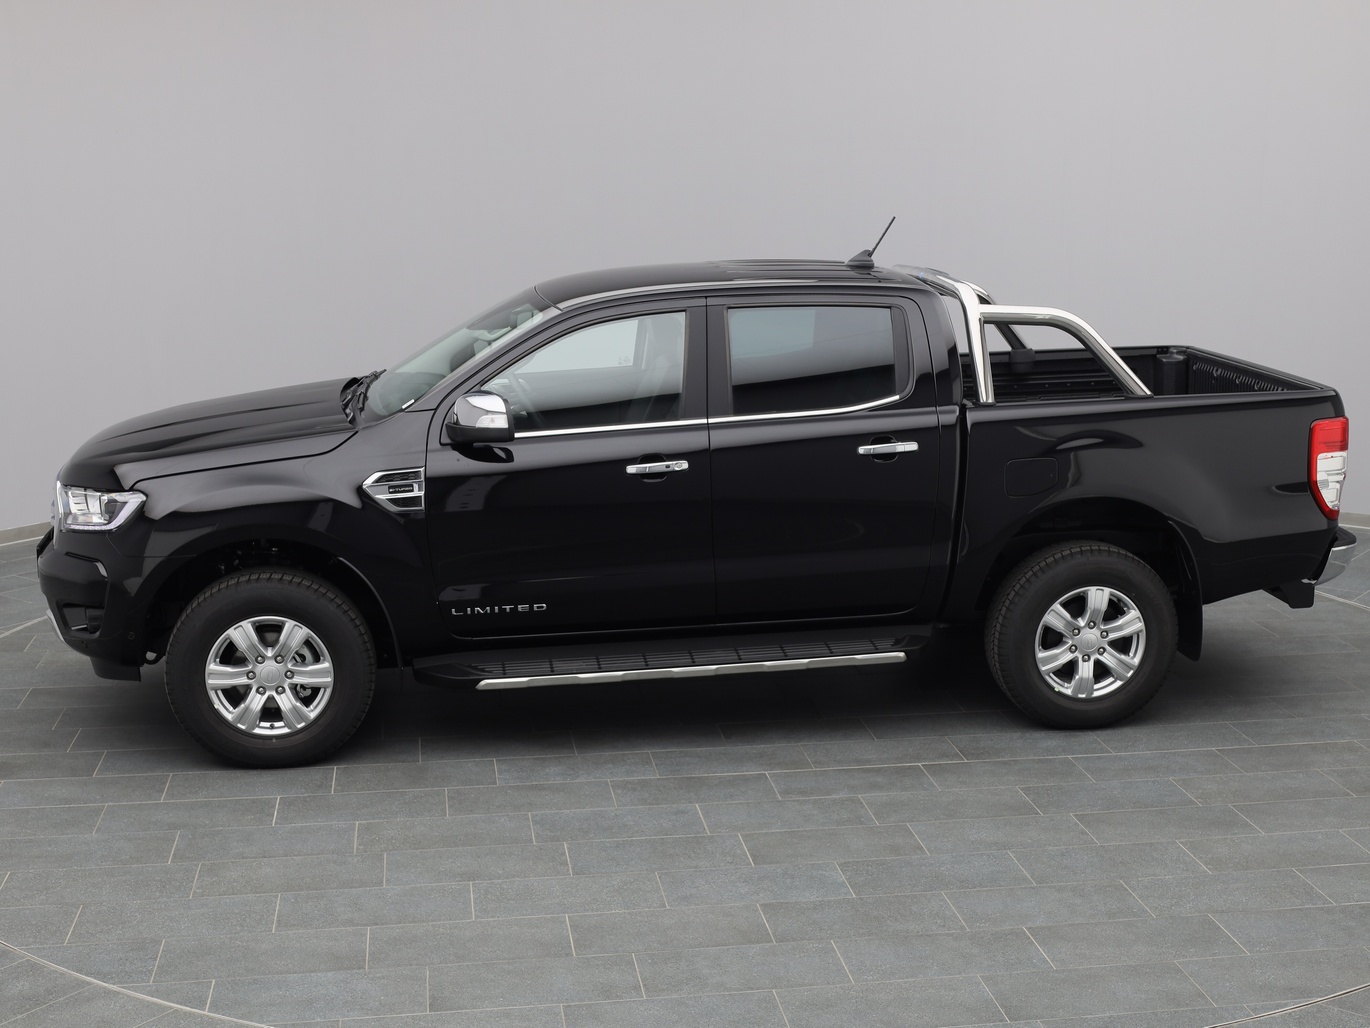  Ford Ranger DoKa Limited 213PS Aut. / AHK / PDC in Agate Black 